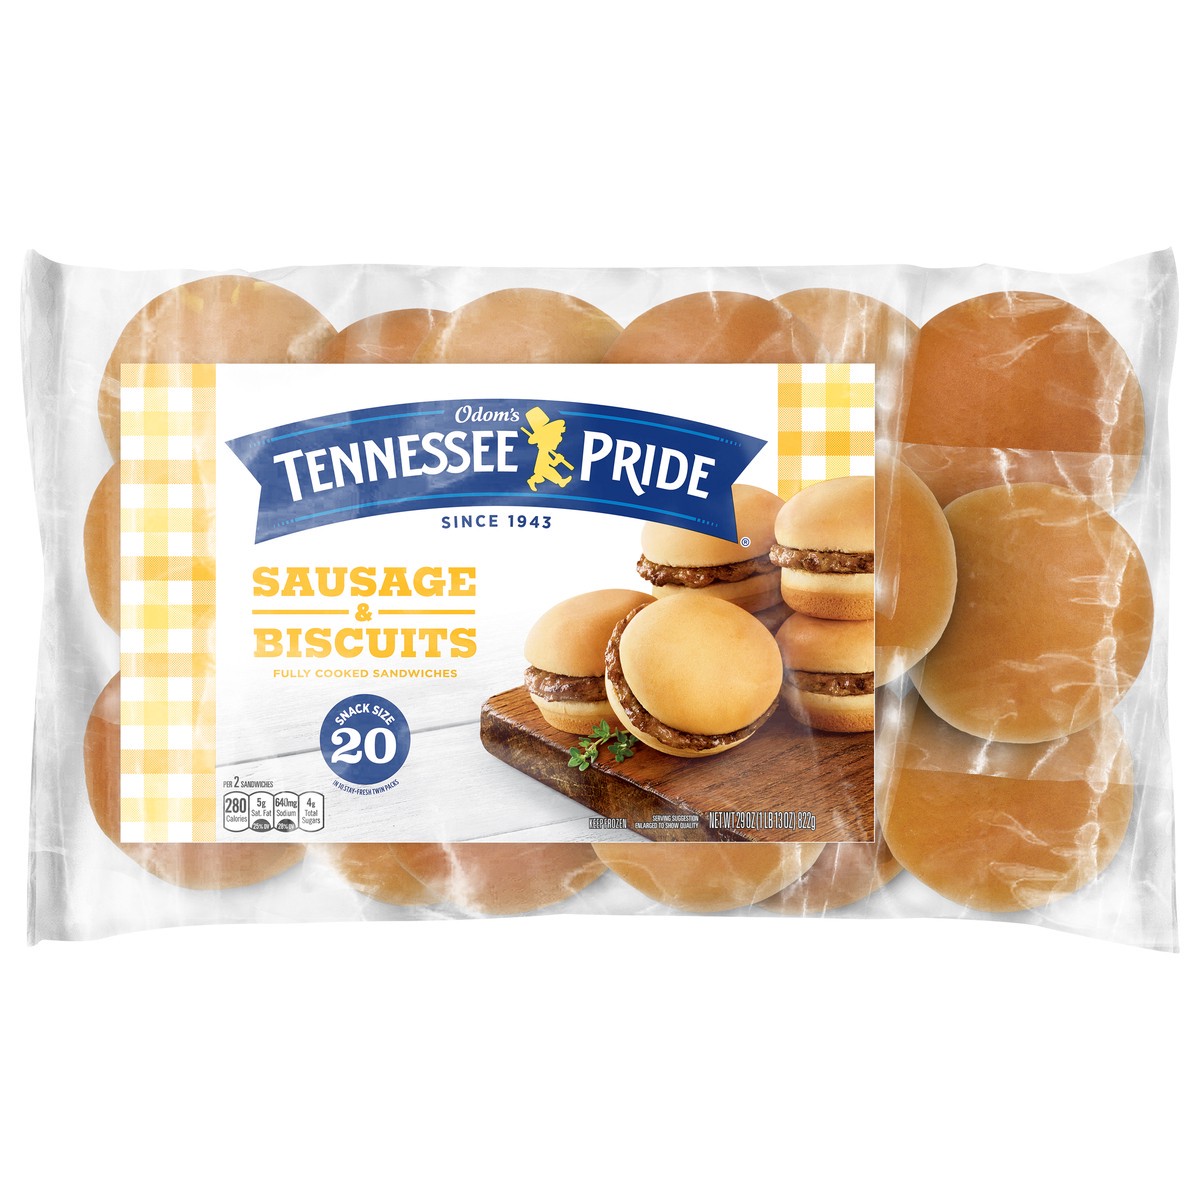 slide 1 of 5, Odom's Tennessee Pride Sausage & Biscuits Sandwich Snack size 20 ea, 20 ct